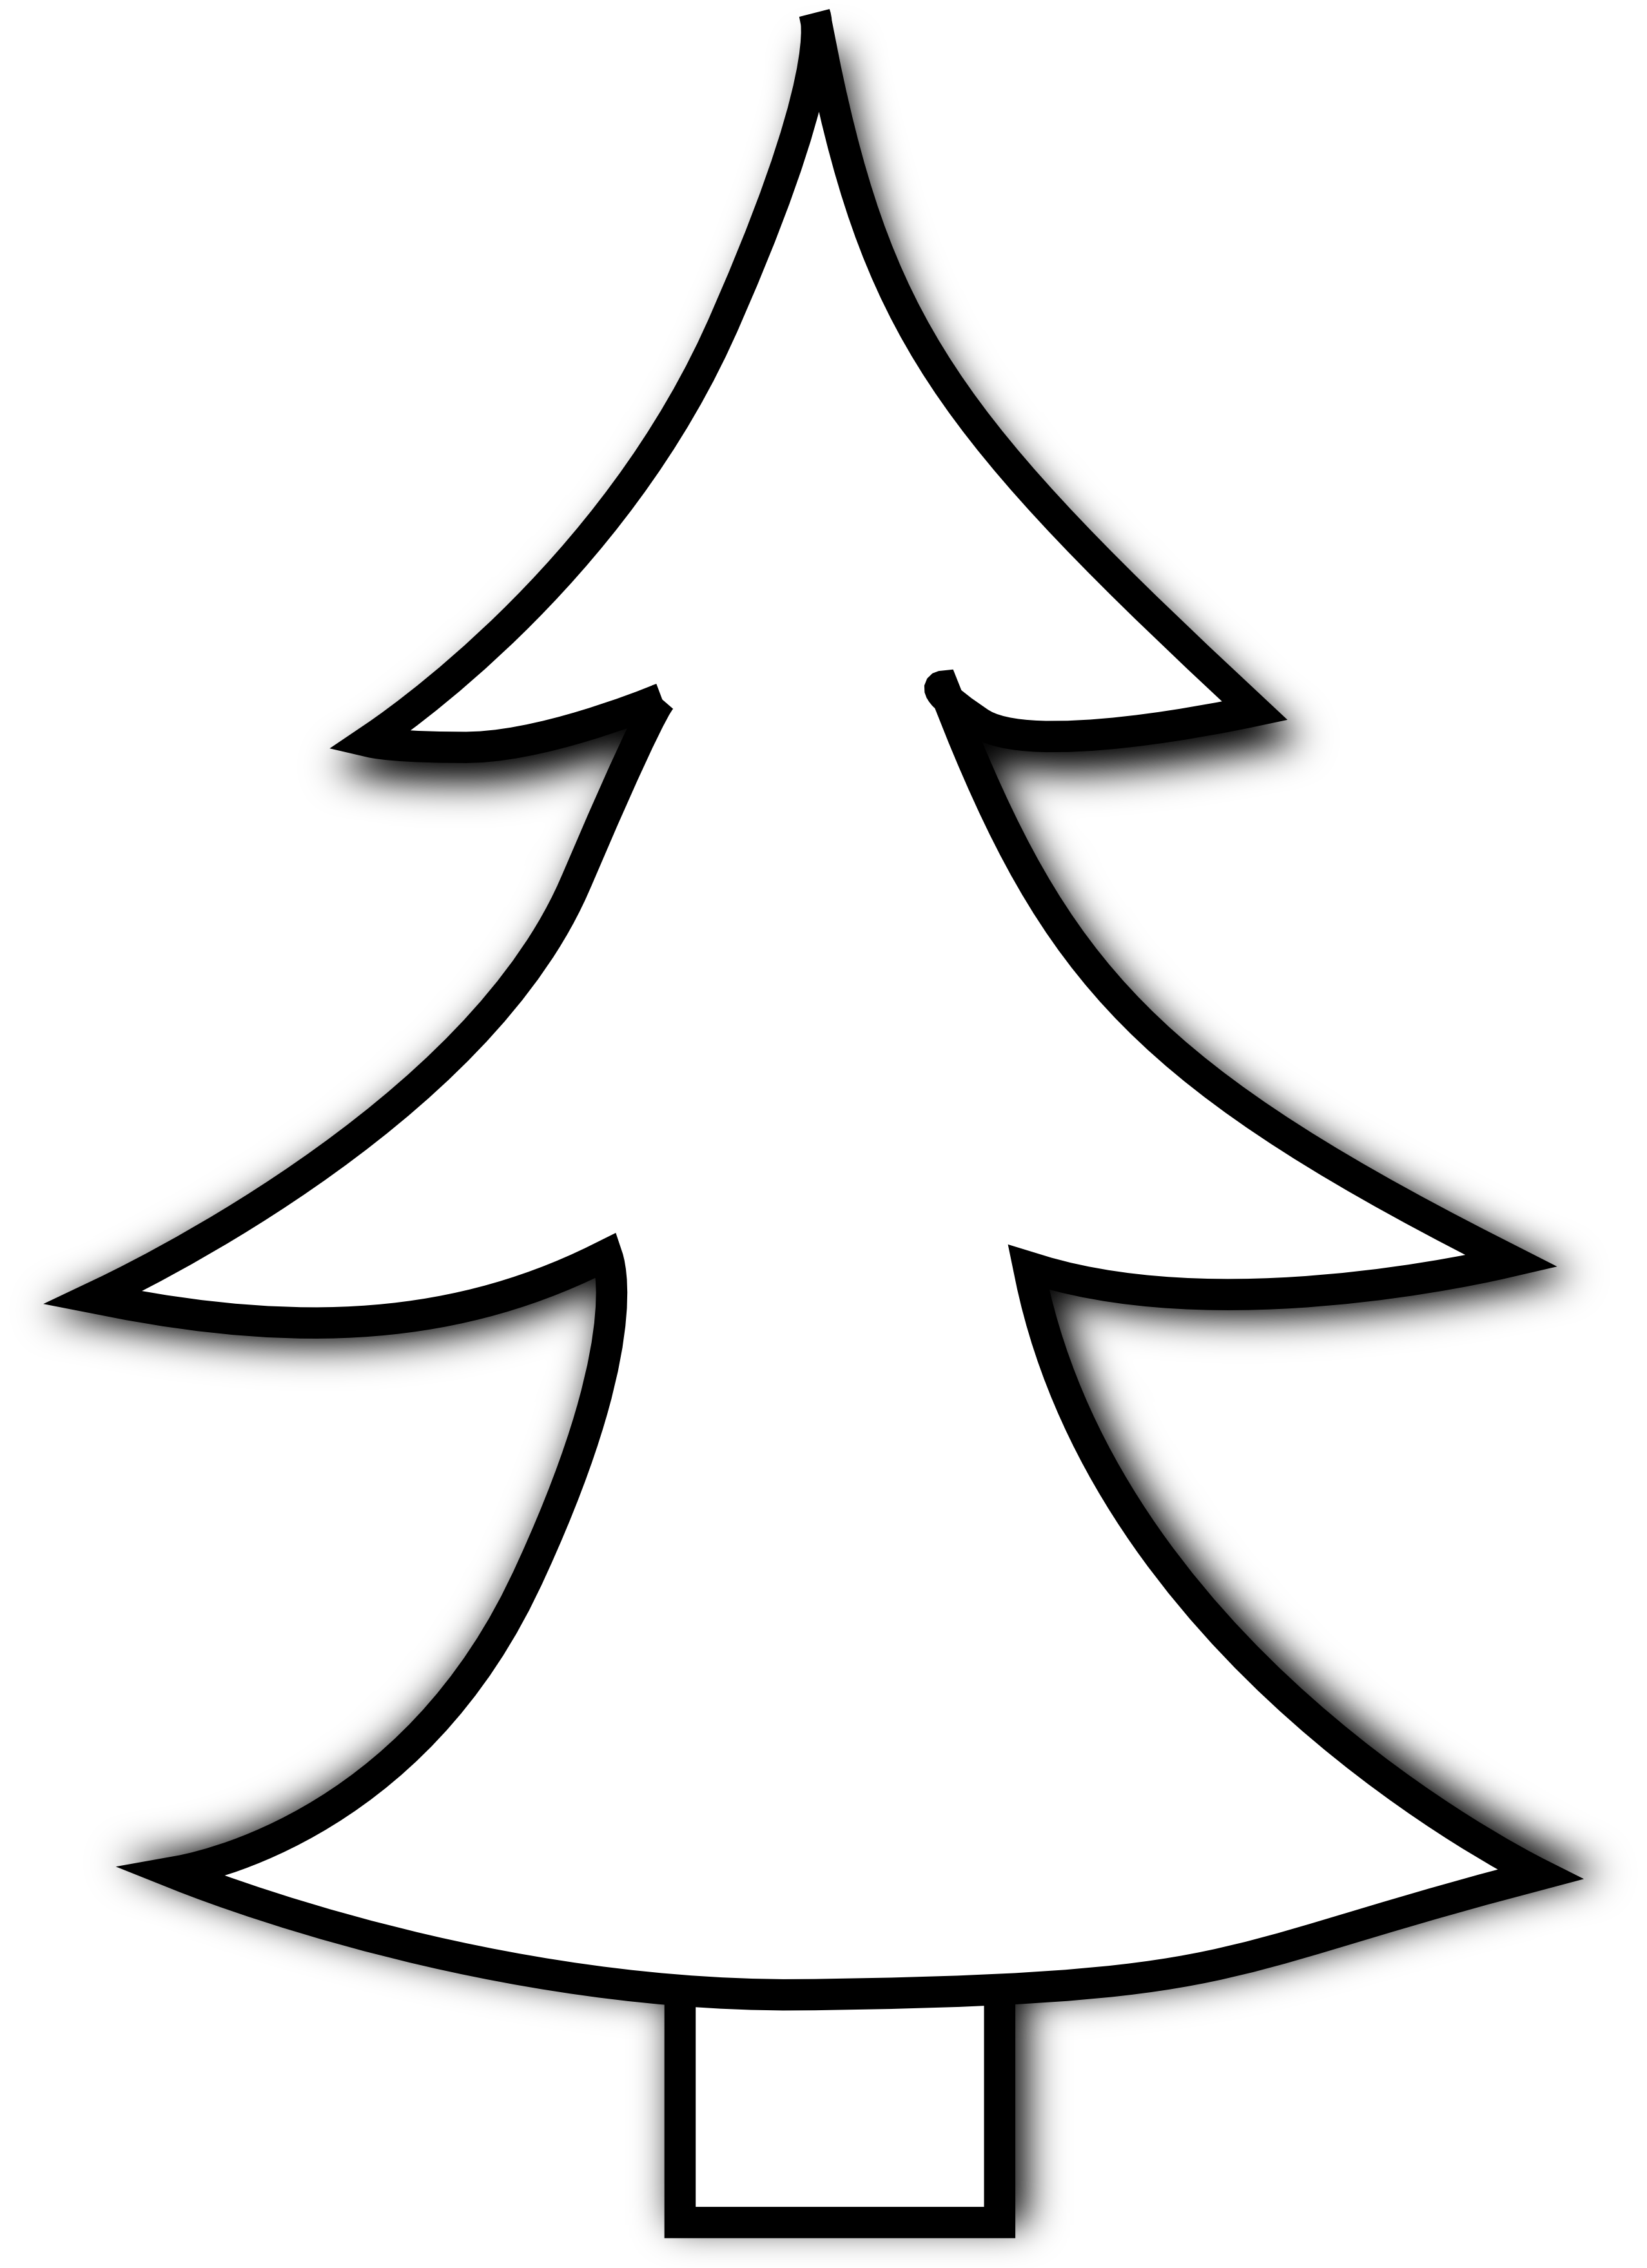 christmas tree clipart black  - Tree Black And White Clipart